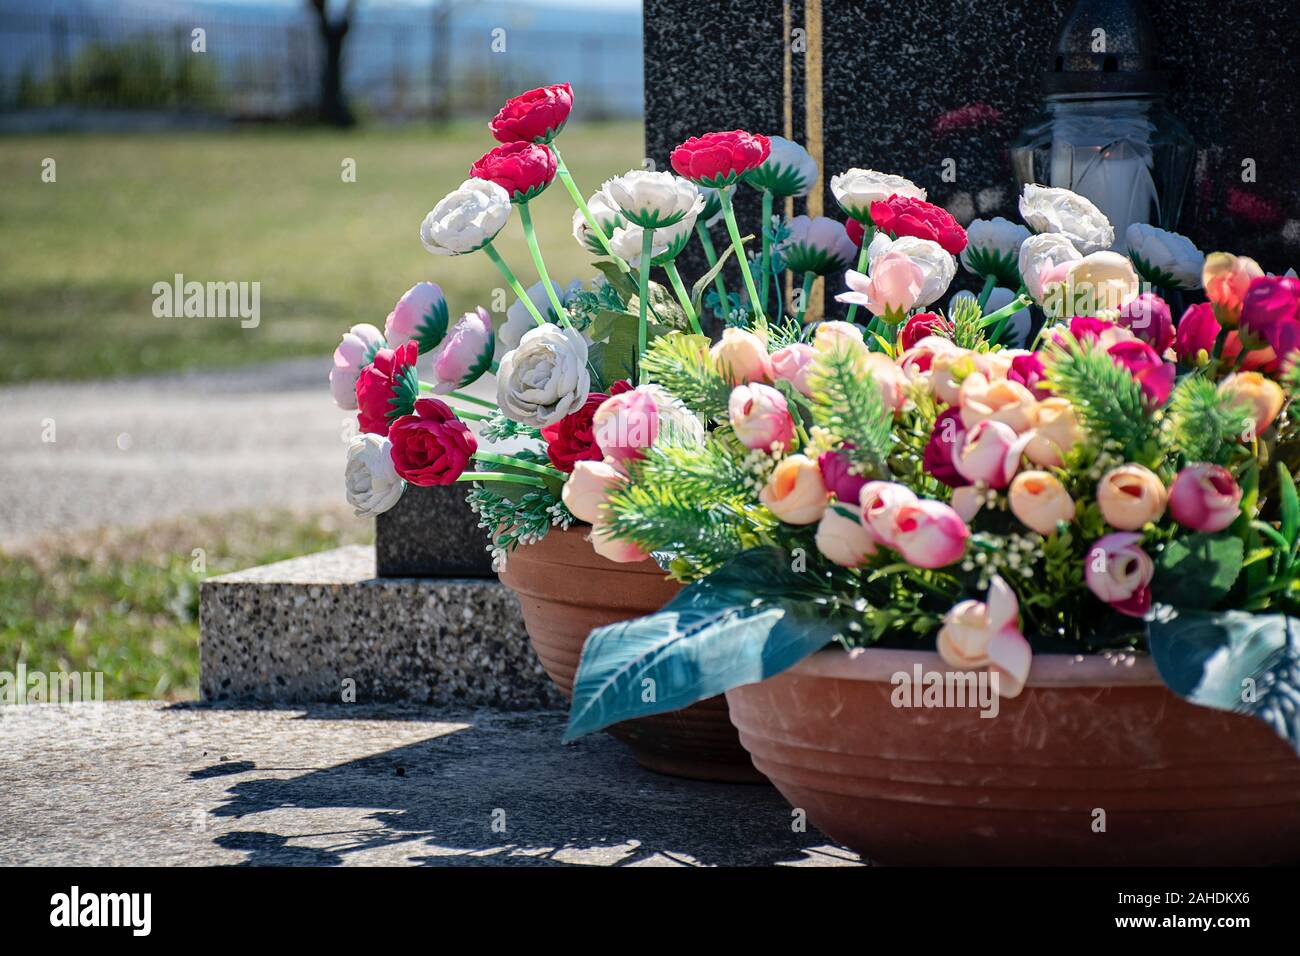 Decoration Day Flower Grave High Resolution Stock Photography And Images Alamy